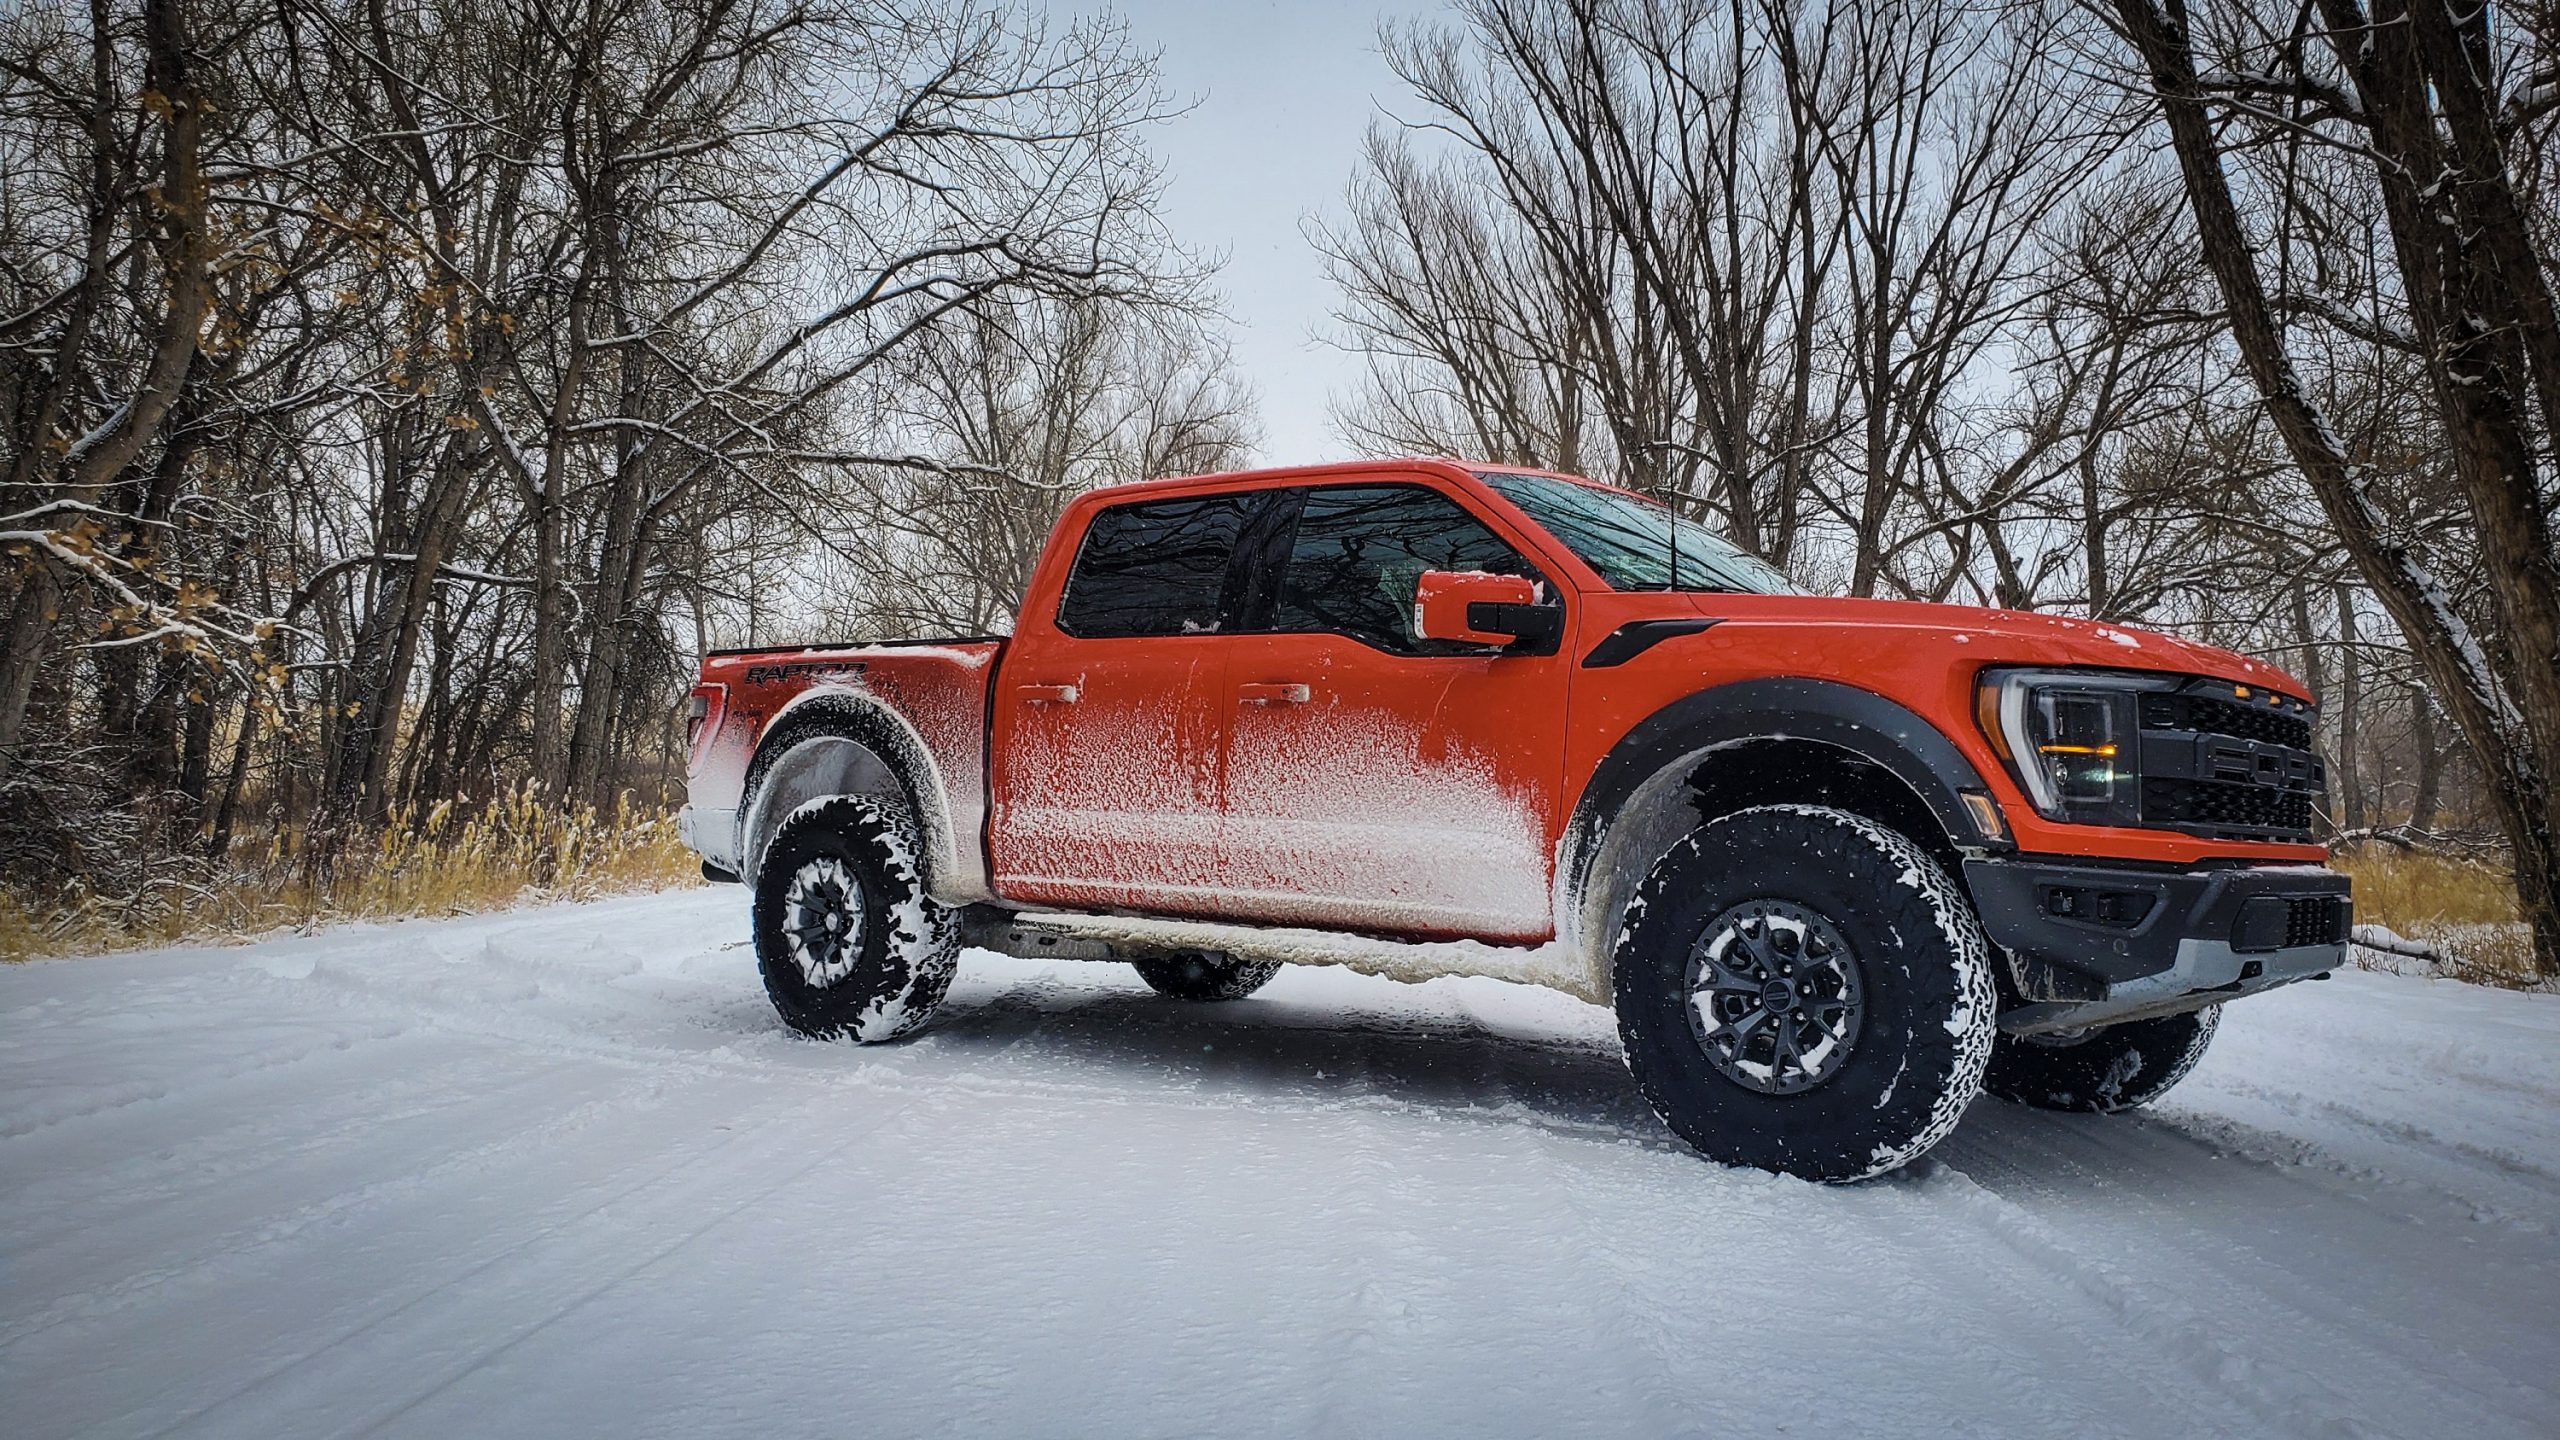 A 3/4 shot of the 2021 Ford Raptor truck in orange during a snowstorm